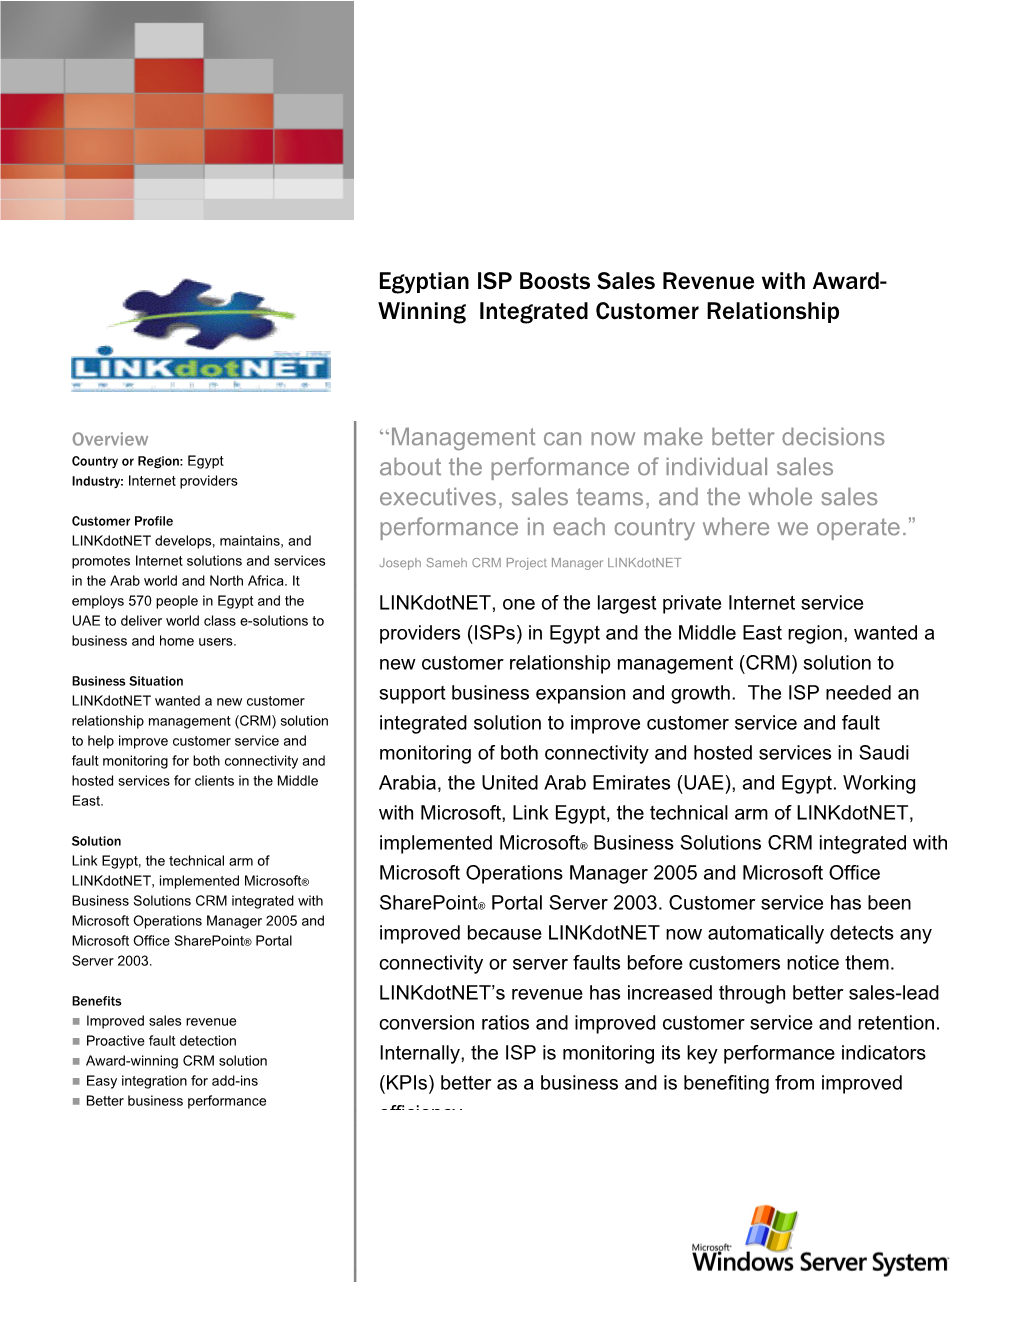 Egyptian ISP Boosts Sales Revenue with Award-Winning Integrated Customer Relationship